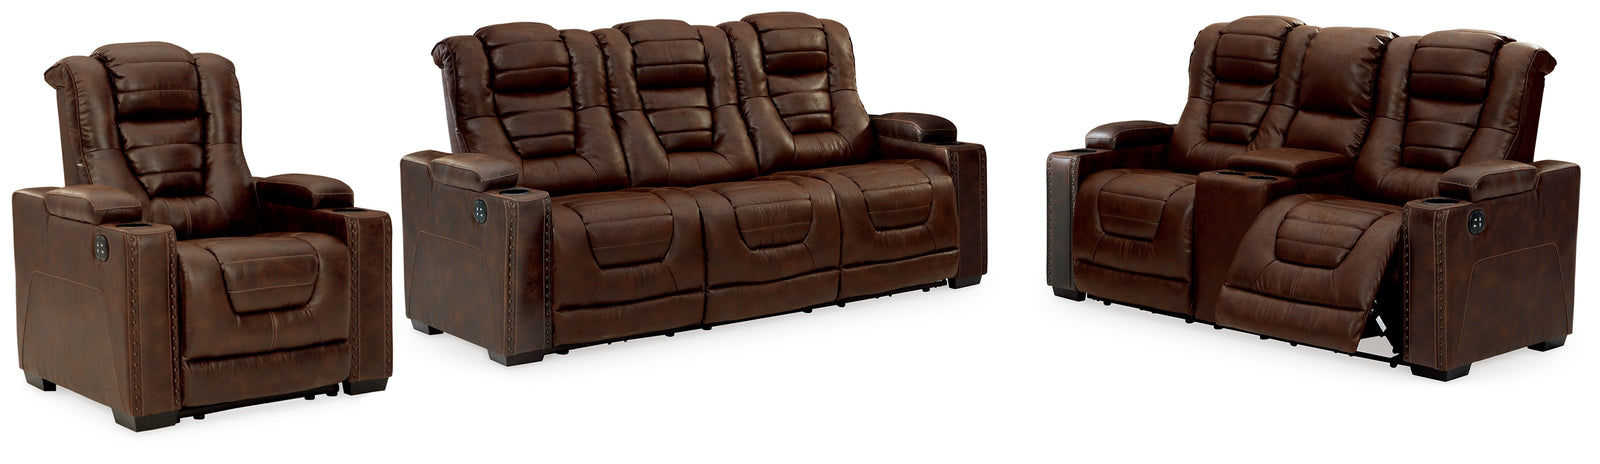 Owner's Thyme Box Sofa, Loveseat And Recliner